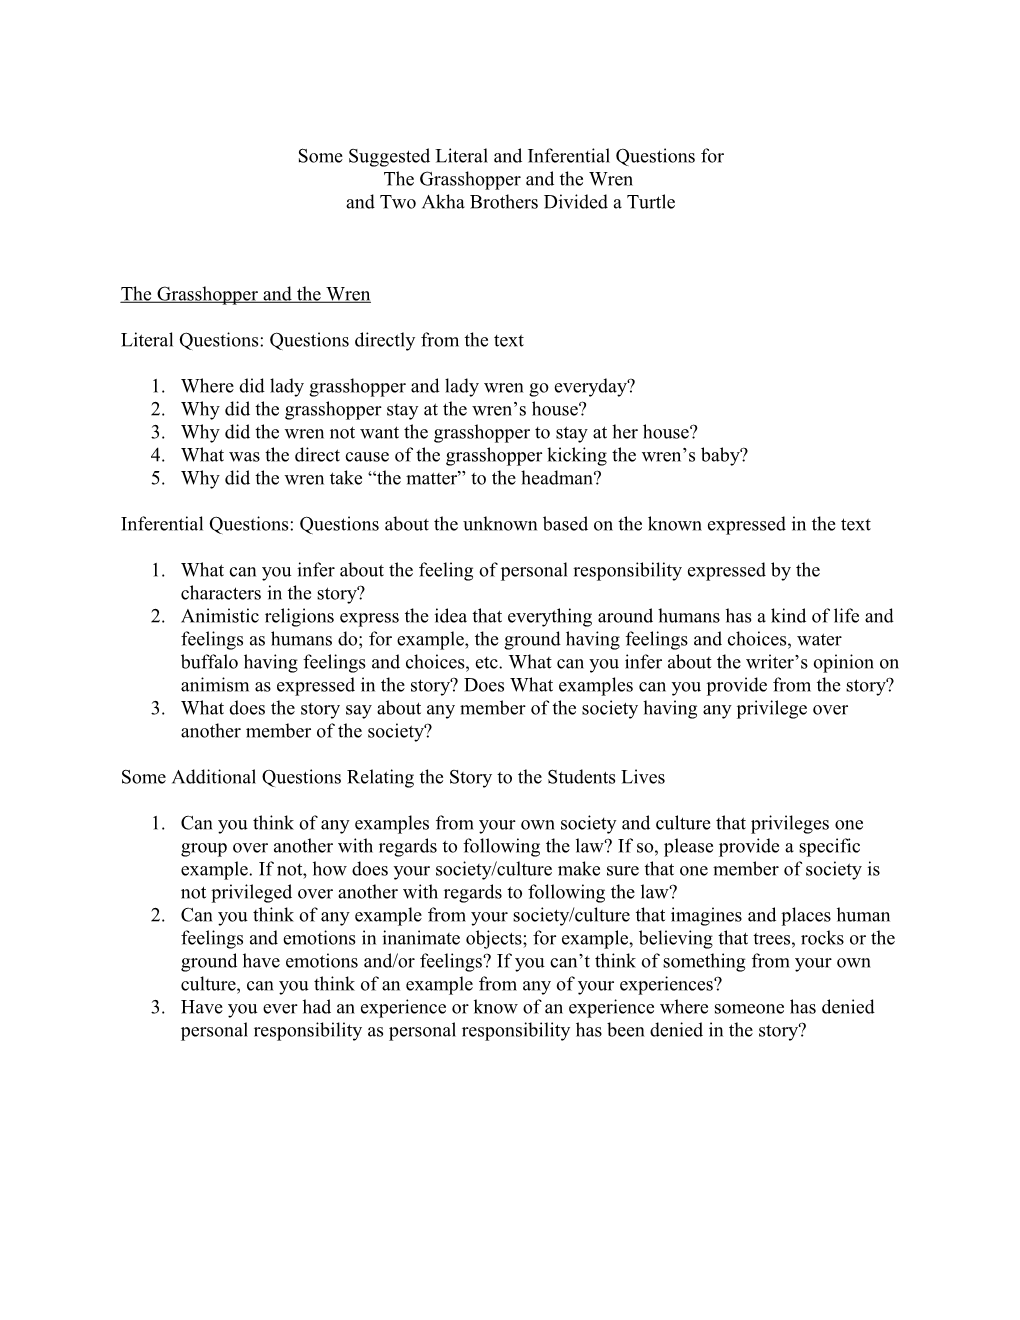 Some Suggested Literal, Inferential, and Evaluative Questions For